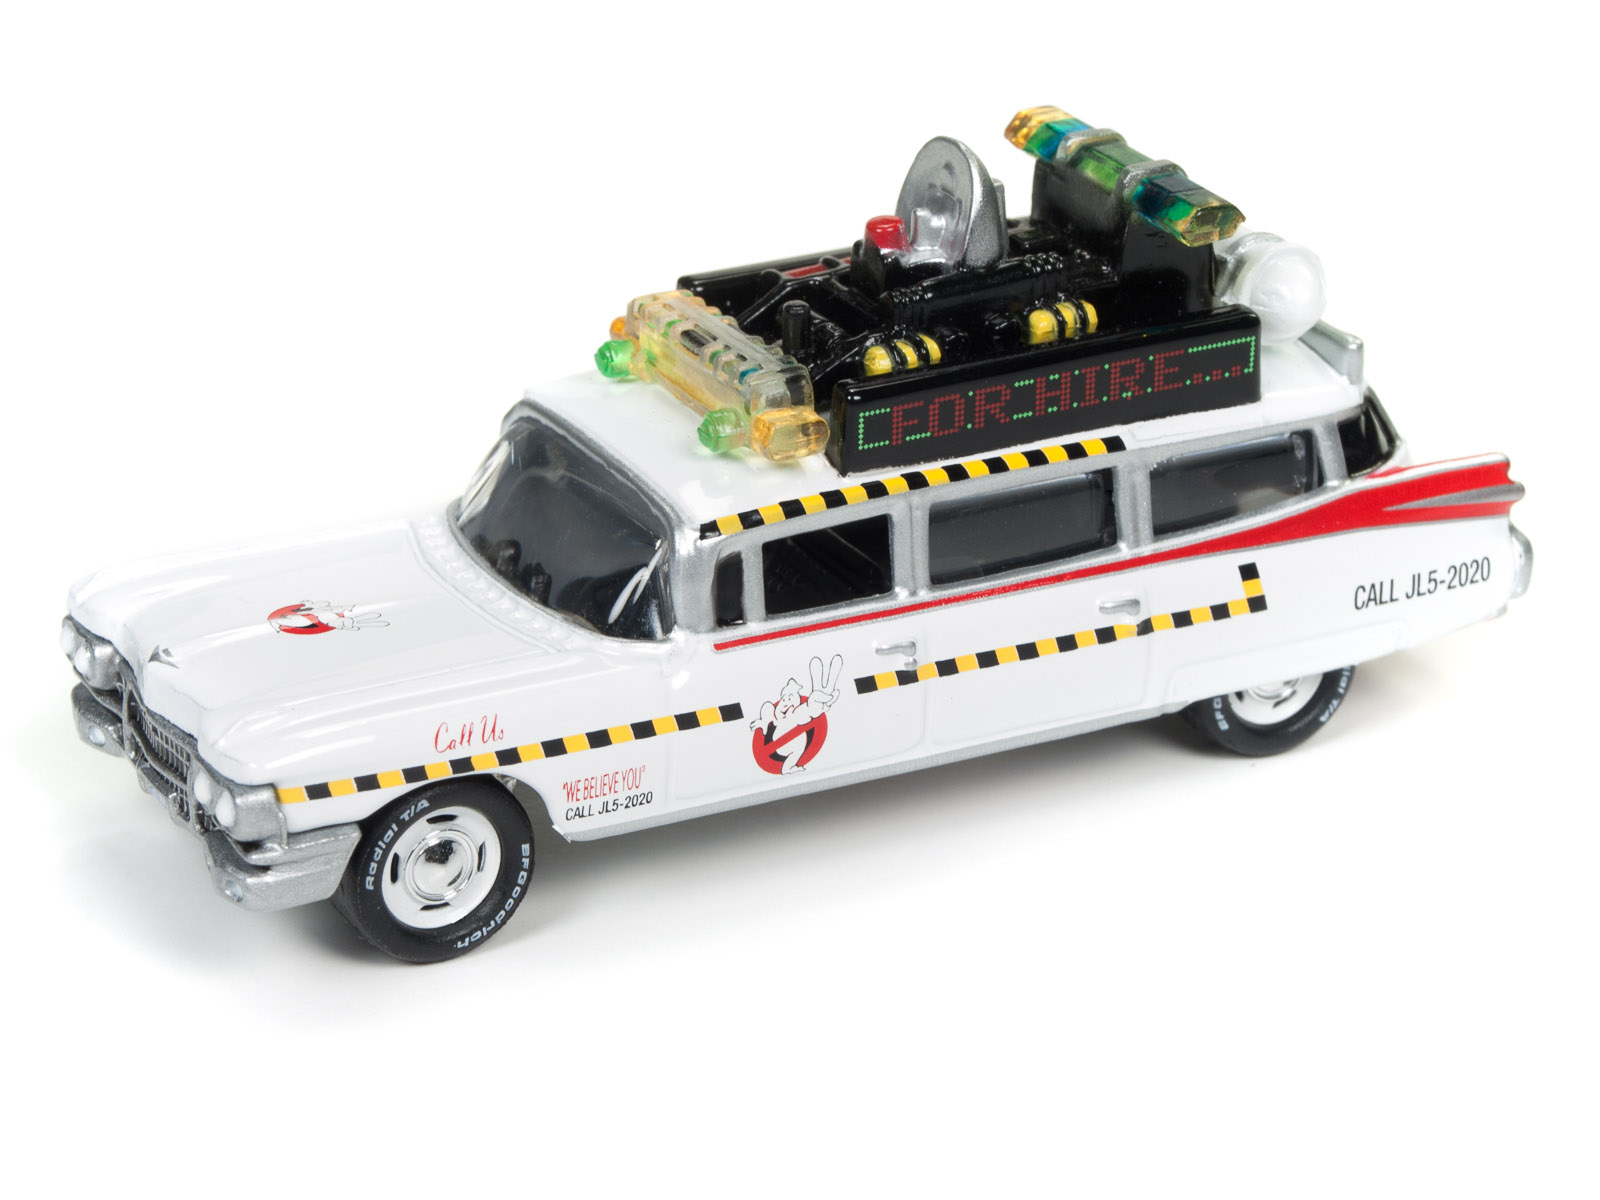 1959 Cadillac Ghostbusters Ecto-1A from Ghostbusters 1 Movie (JLSS004 ...